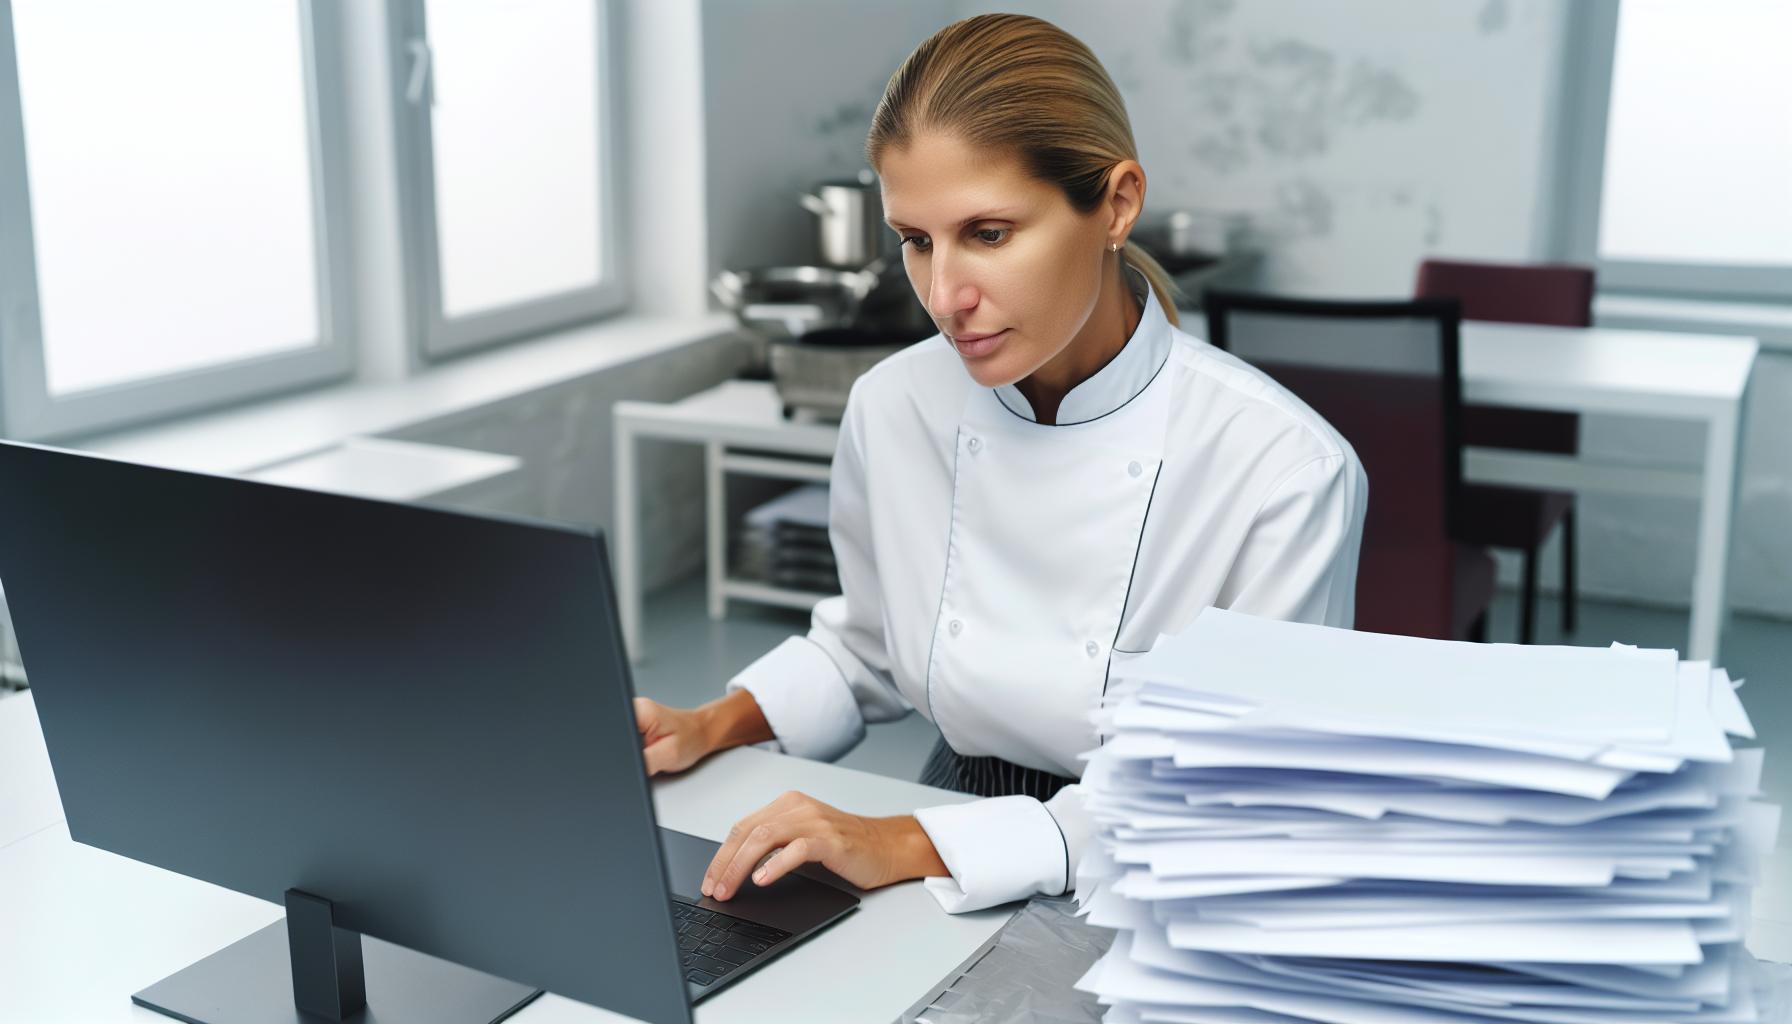 Chef with paperwork looking at laptop